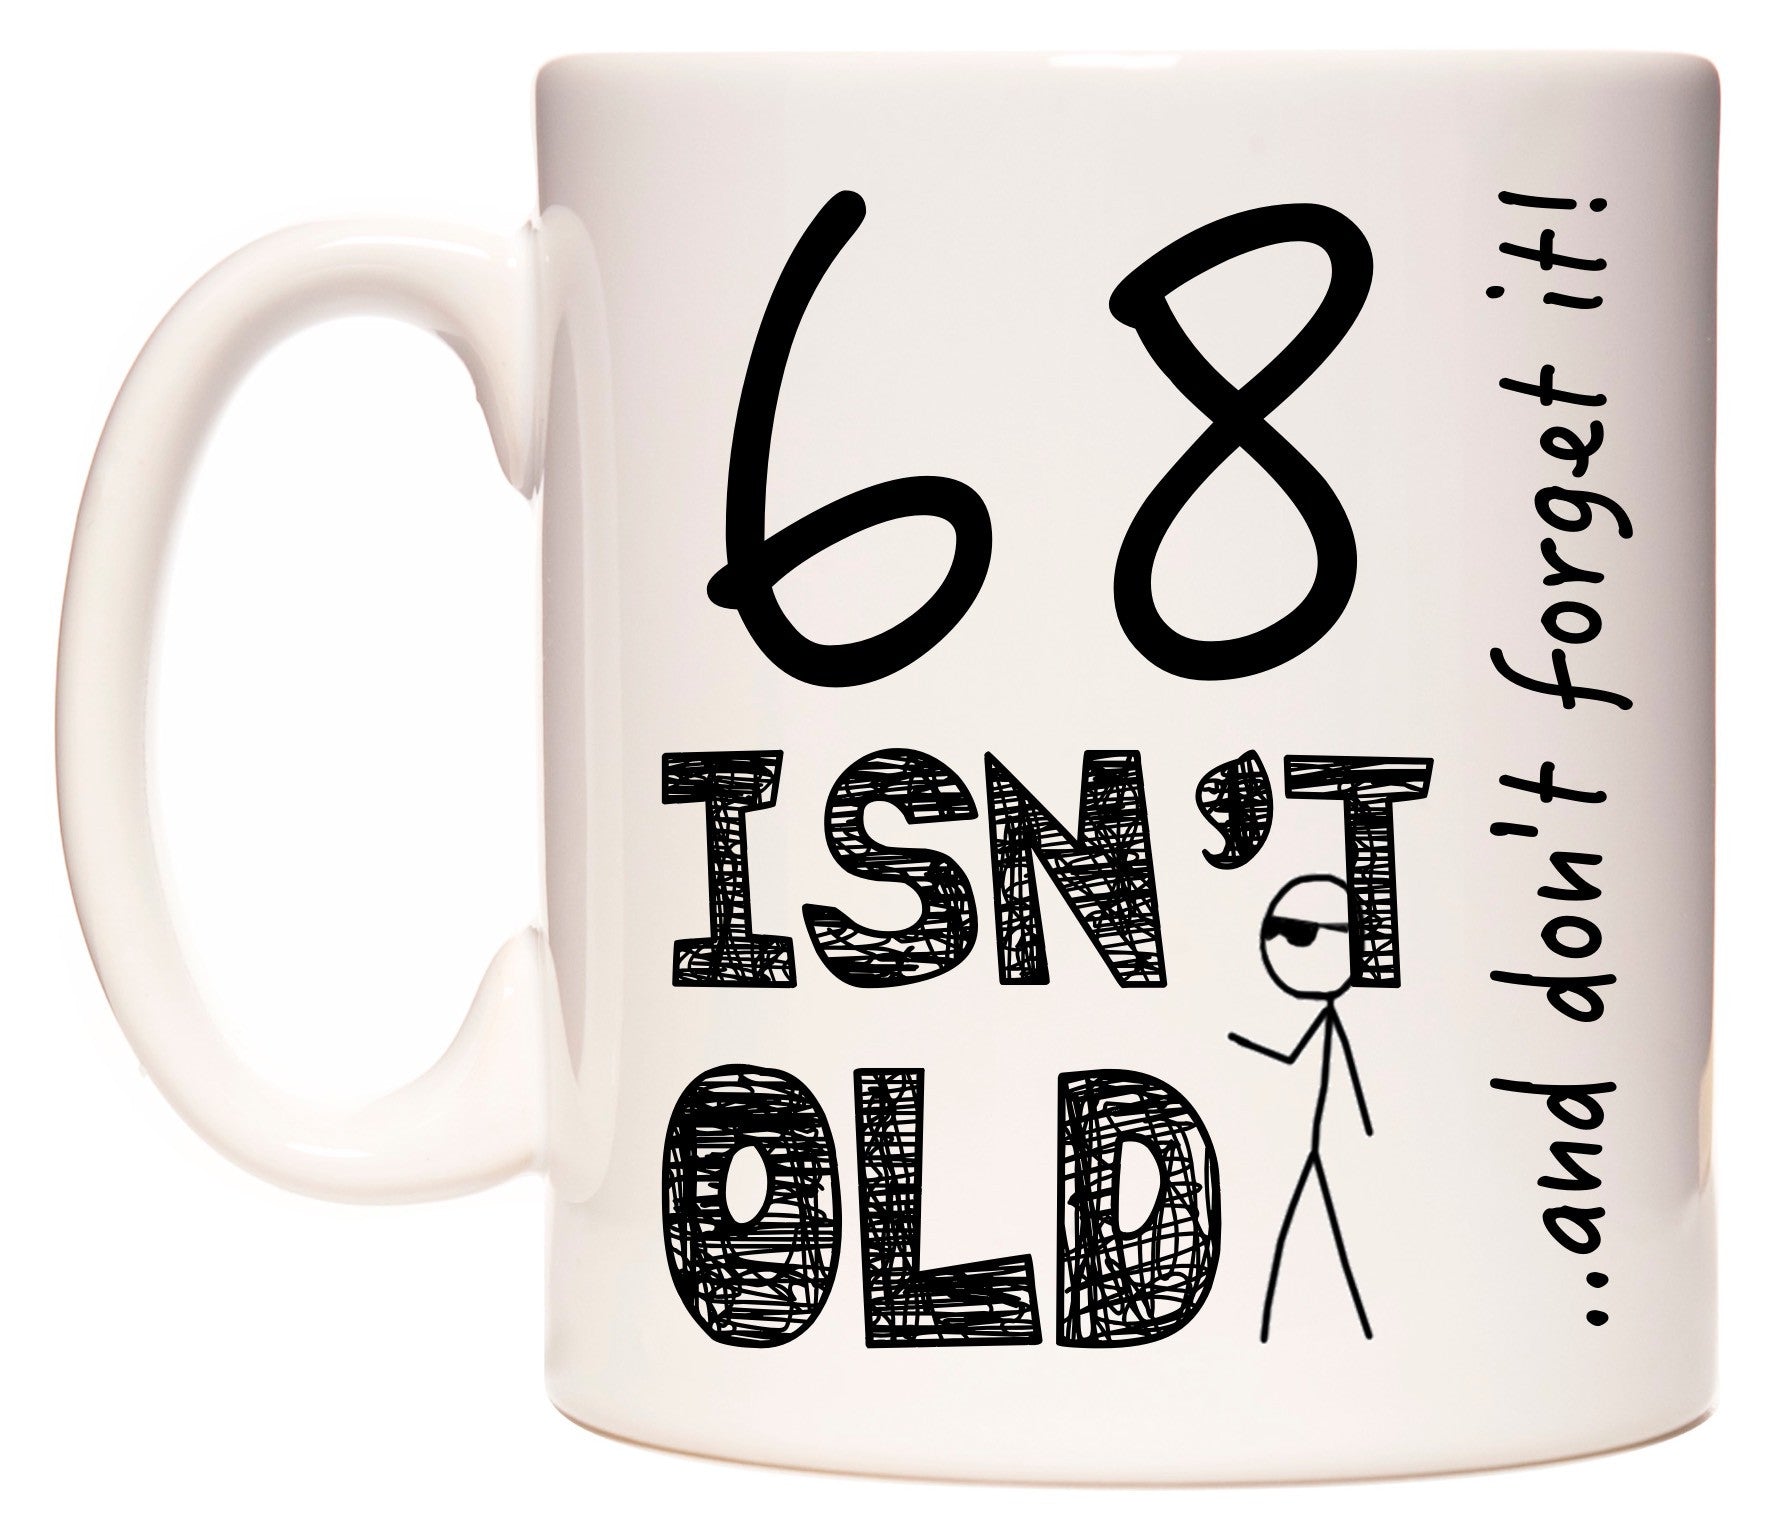 This mug features 68 Isn't Old